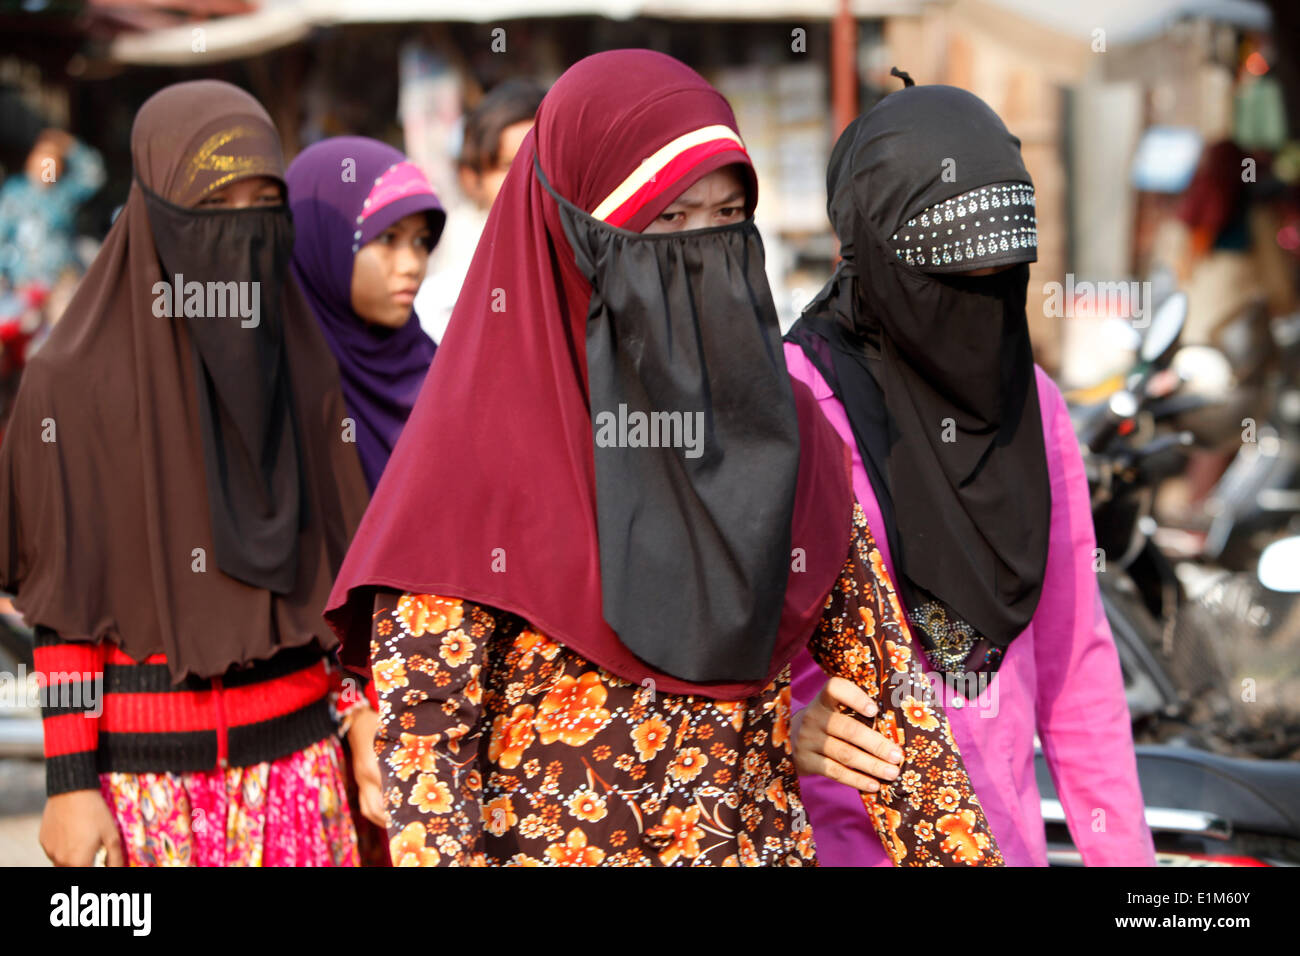 Veil Women Muslim High Resolution Stock Photography and Images - Alamy